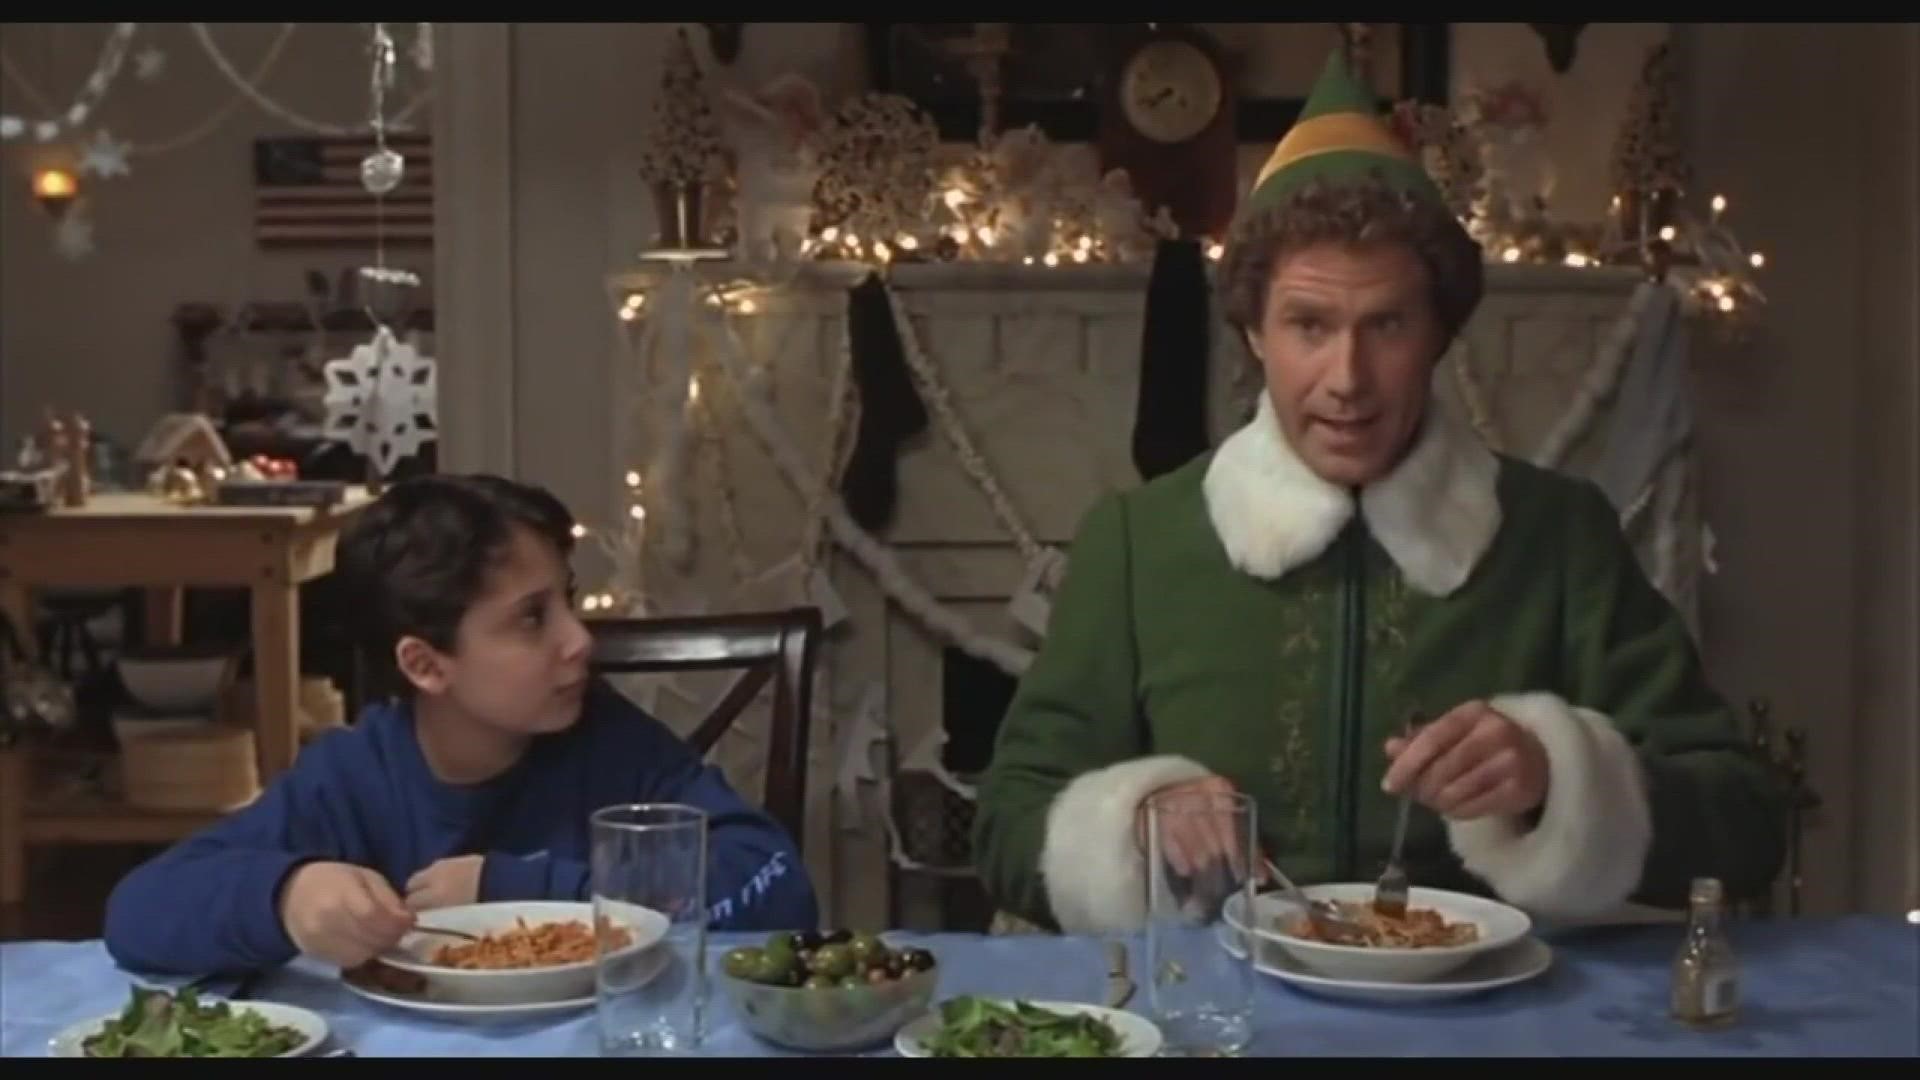 TNT and TBS will be airing holiday movies all November long.